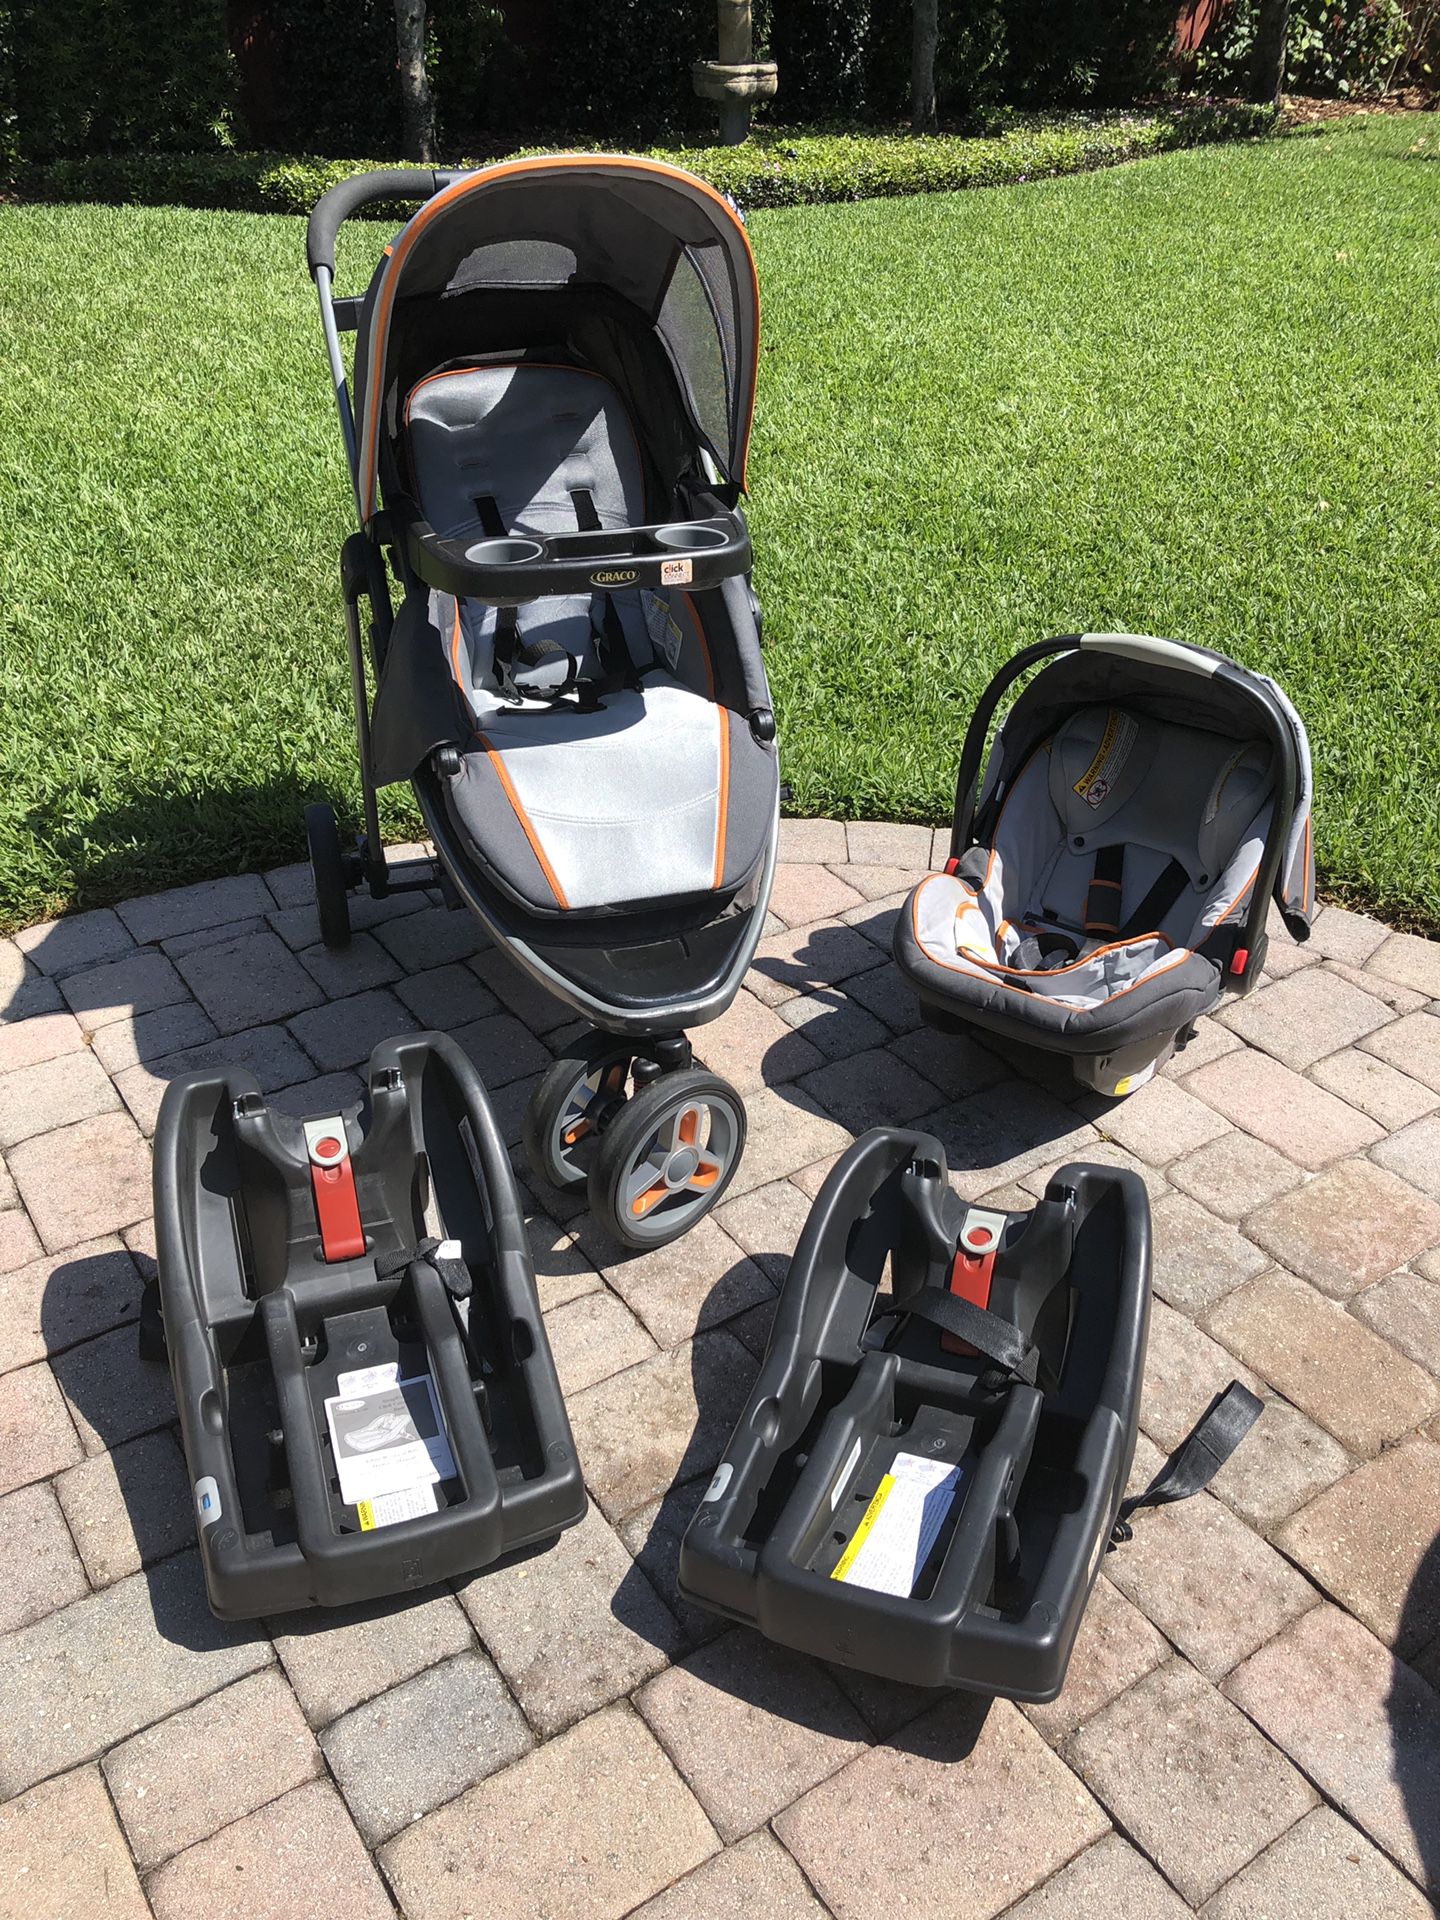 Graco stroller and car seat with two car seat bases